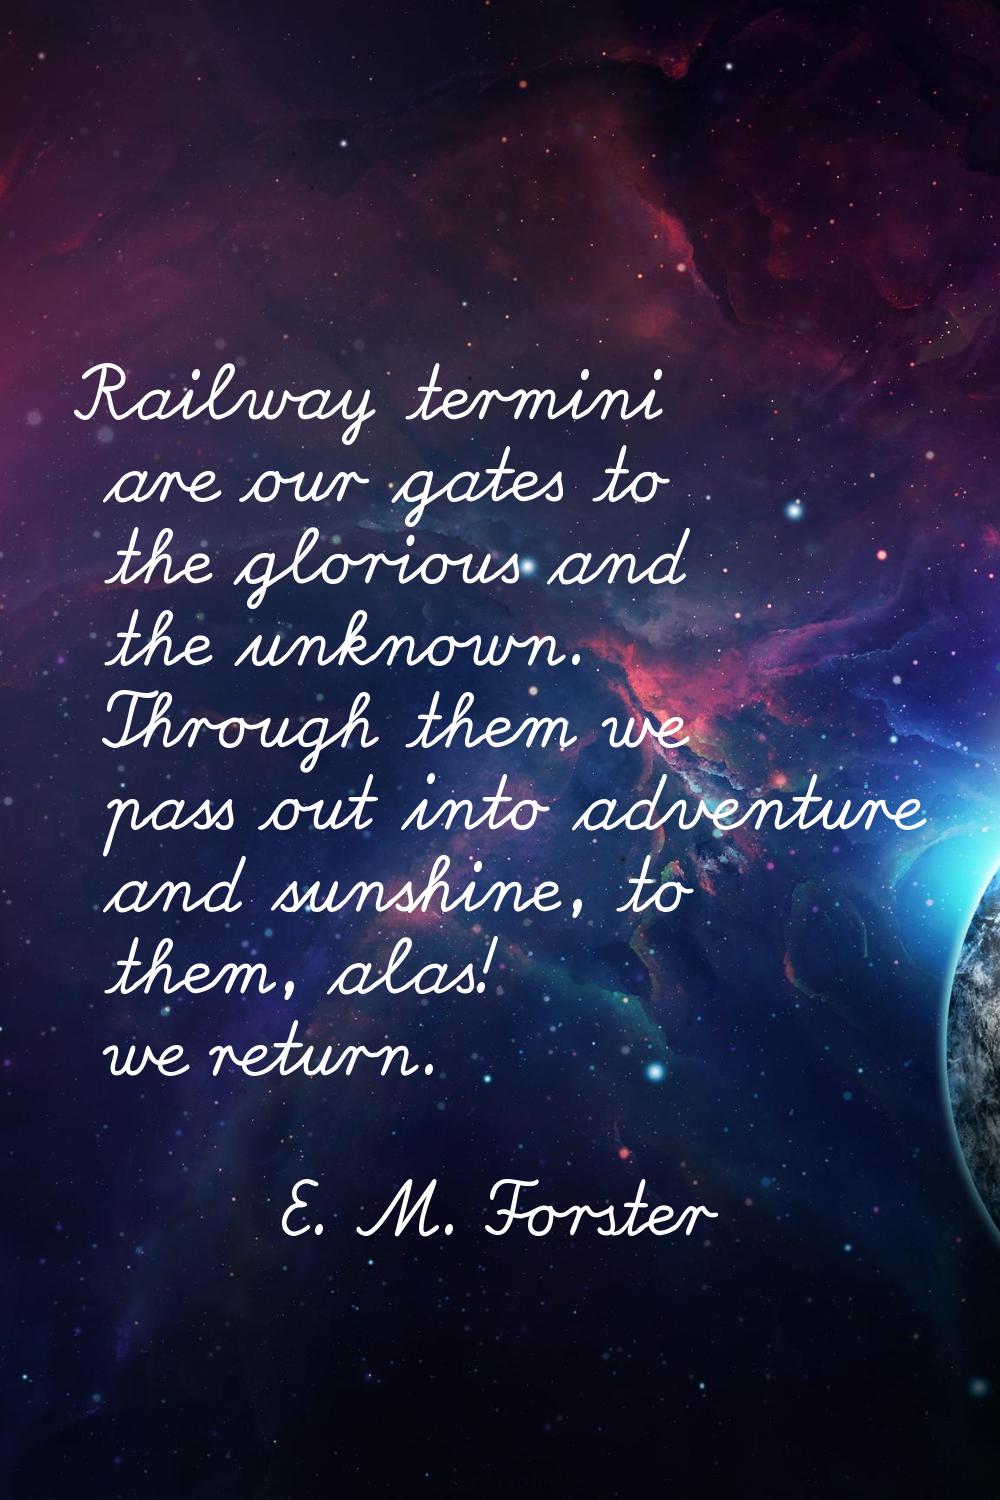 Railway termini are our gates to the glorious and the unknown. Through them we pass out into advent